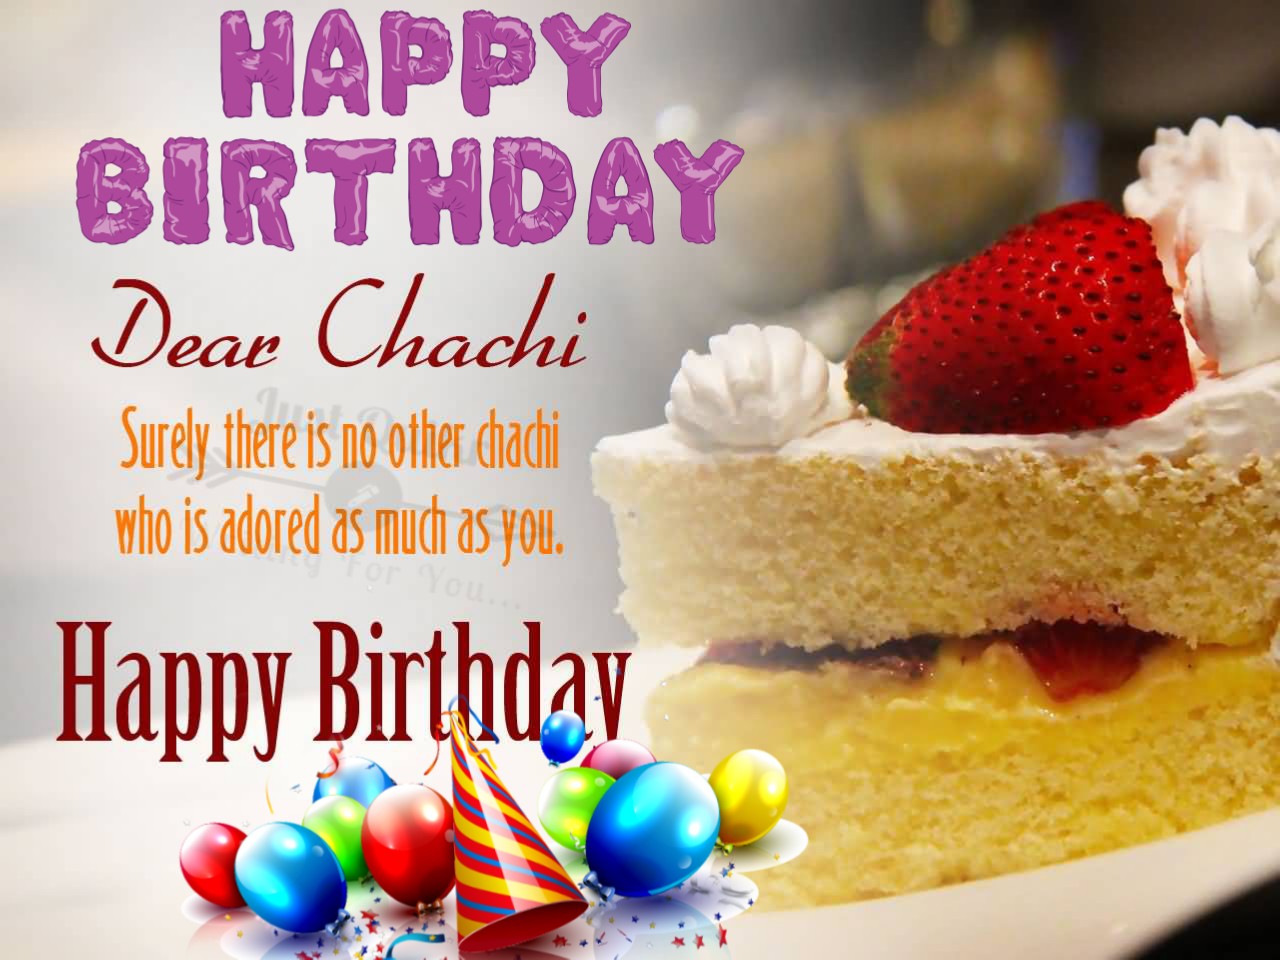 Happy Birthday Cake HD Pics Images with Wishes Quotes for Chachi Ji